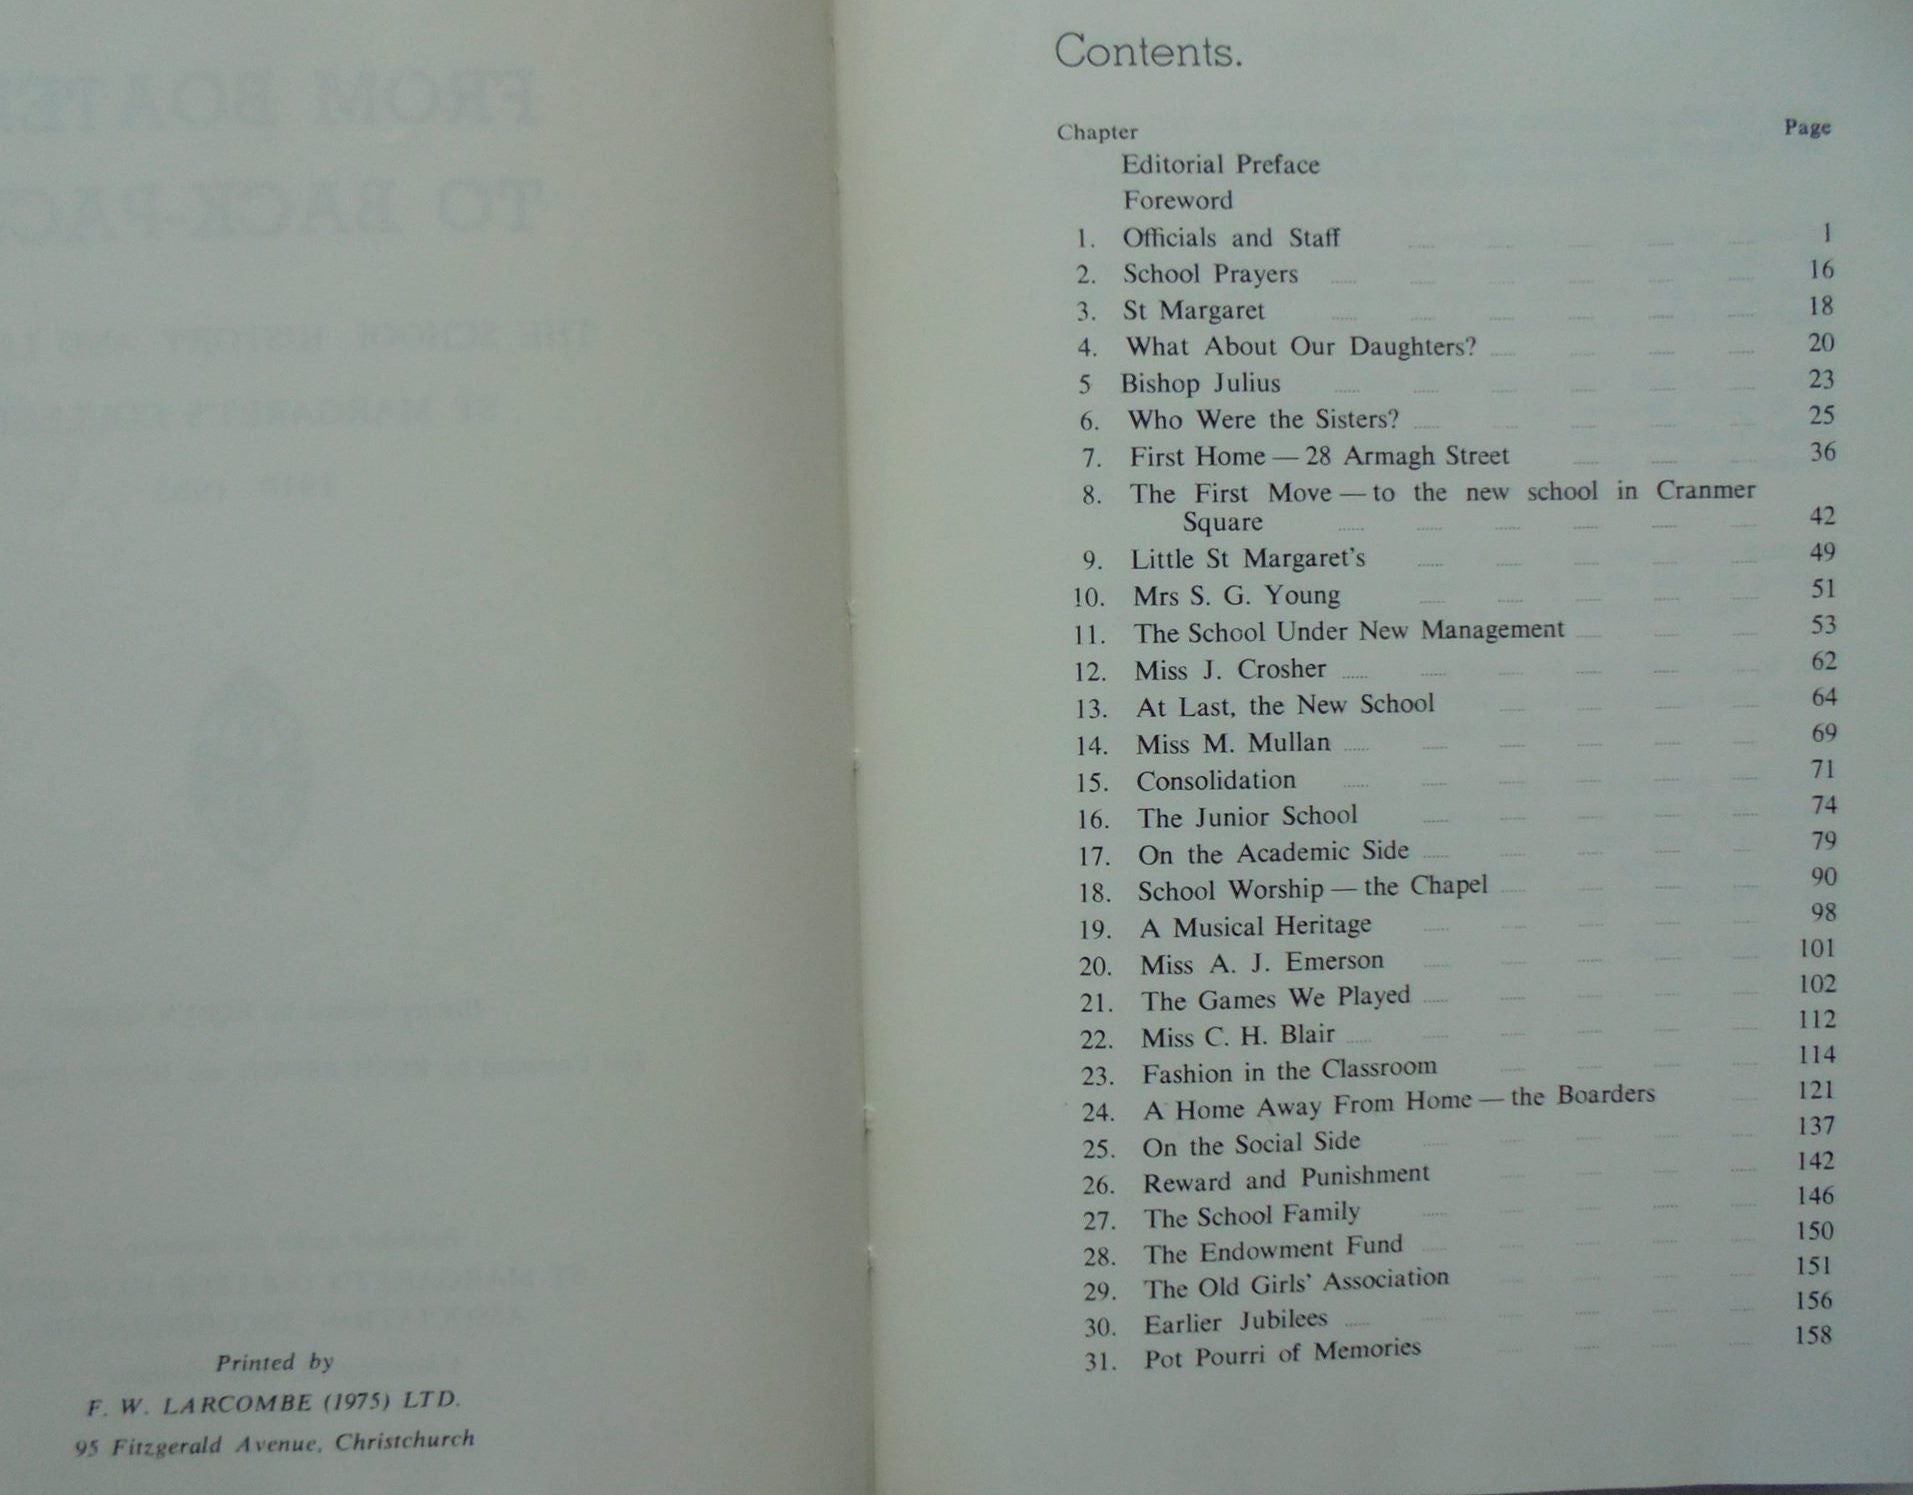 From Boaters to Back-Packs. The School History and List of St Margaret's College 1910-1985 by Robyn Gosset.